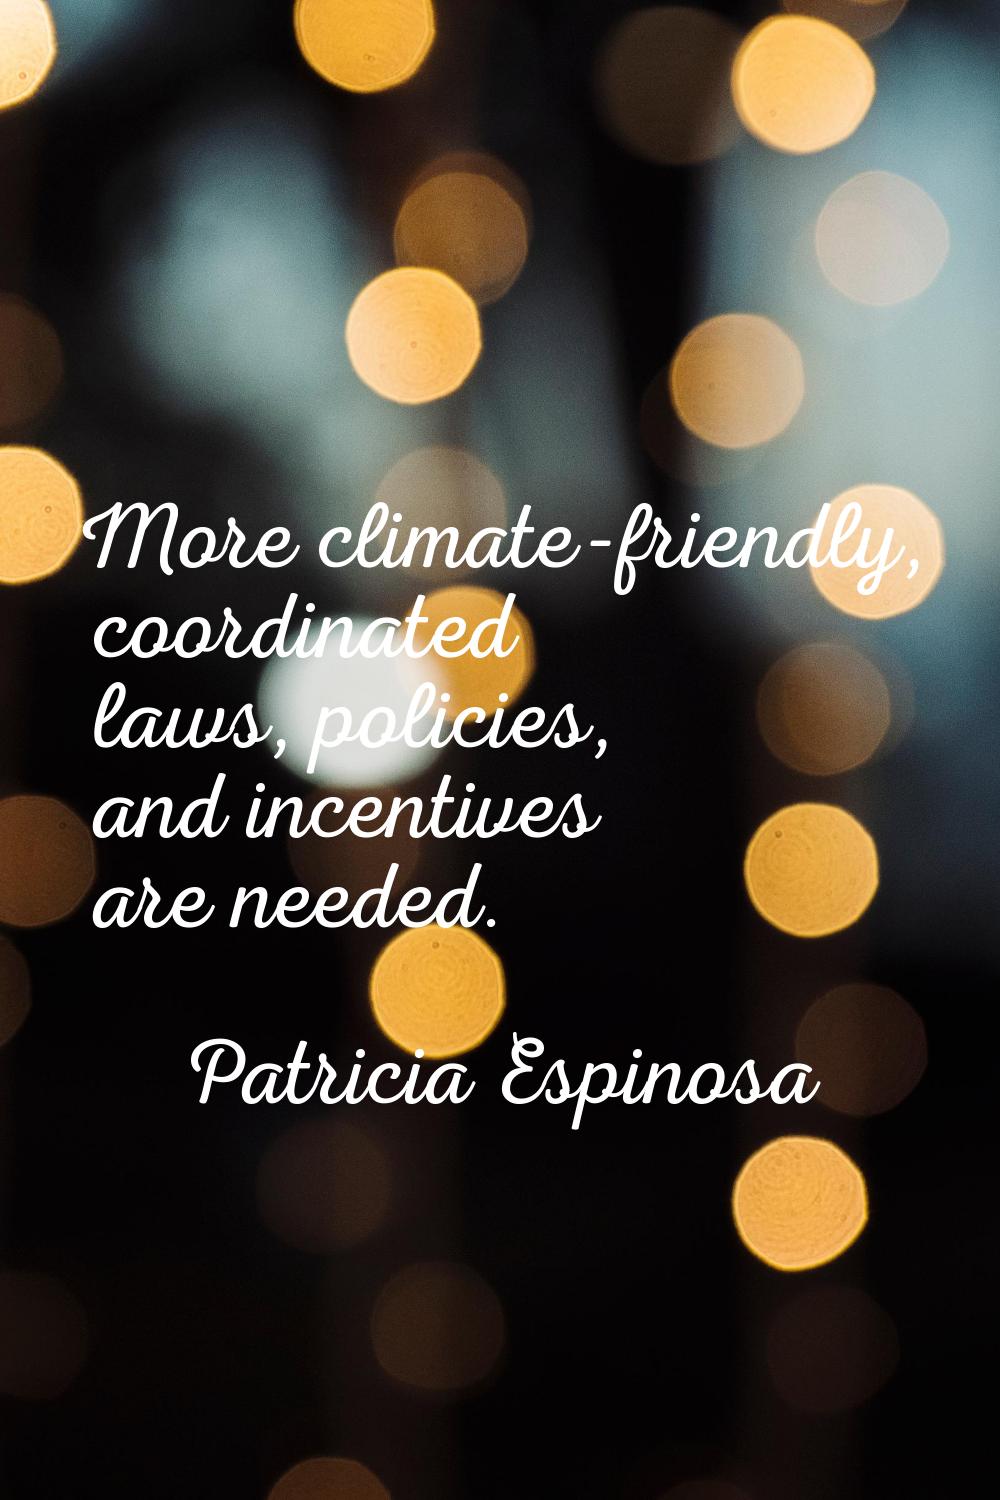 More climate-friendly, coordinated laws, policies, and incentives are needed.